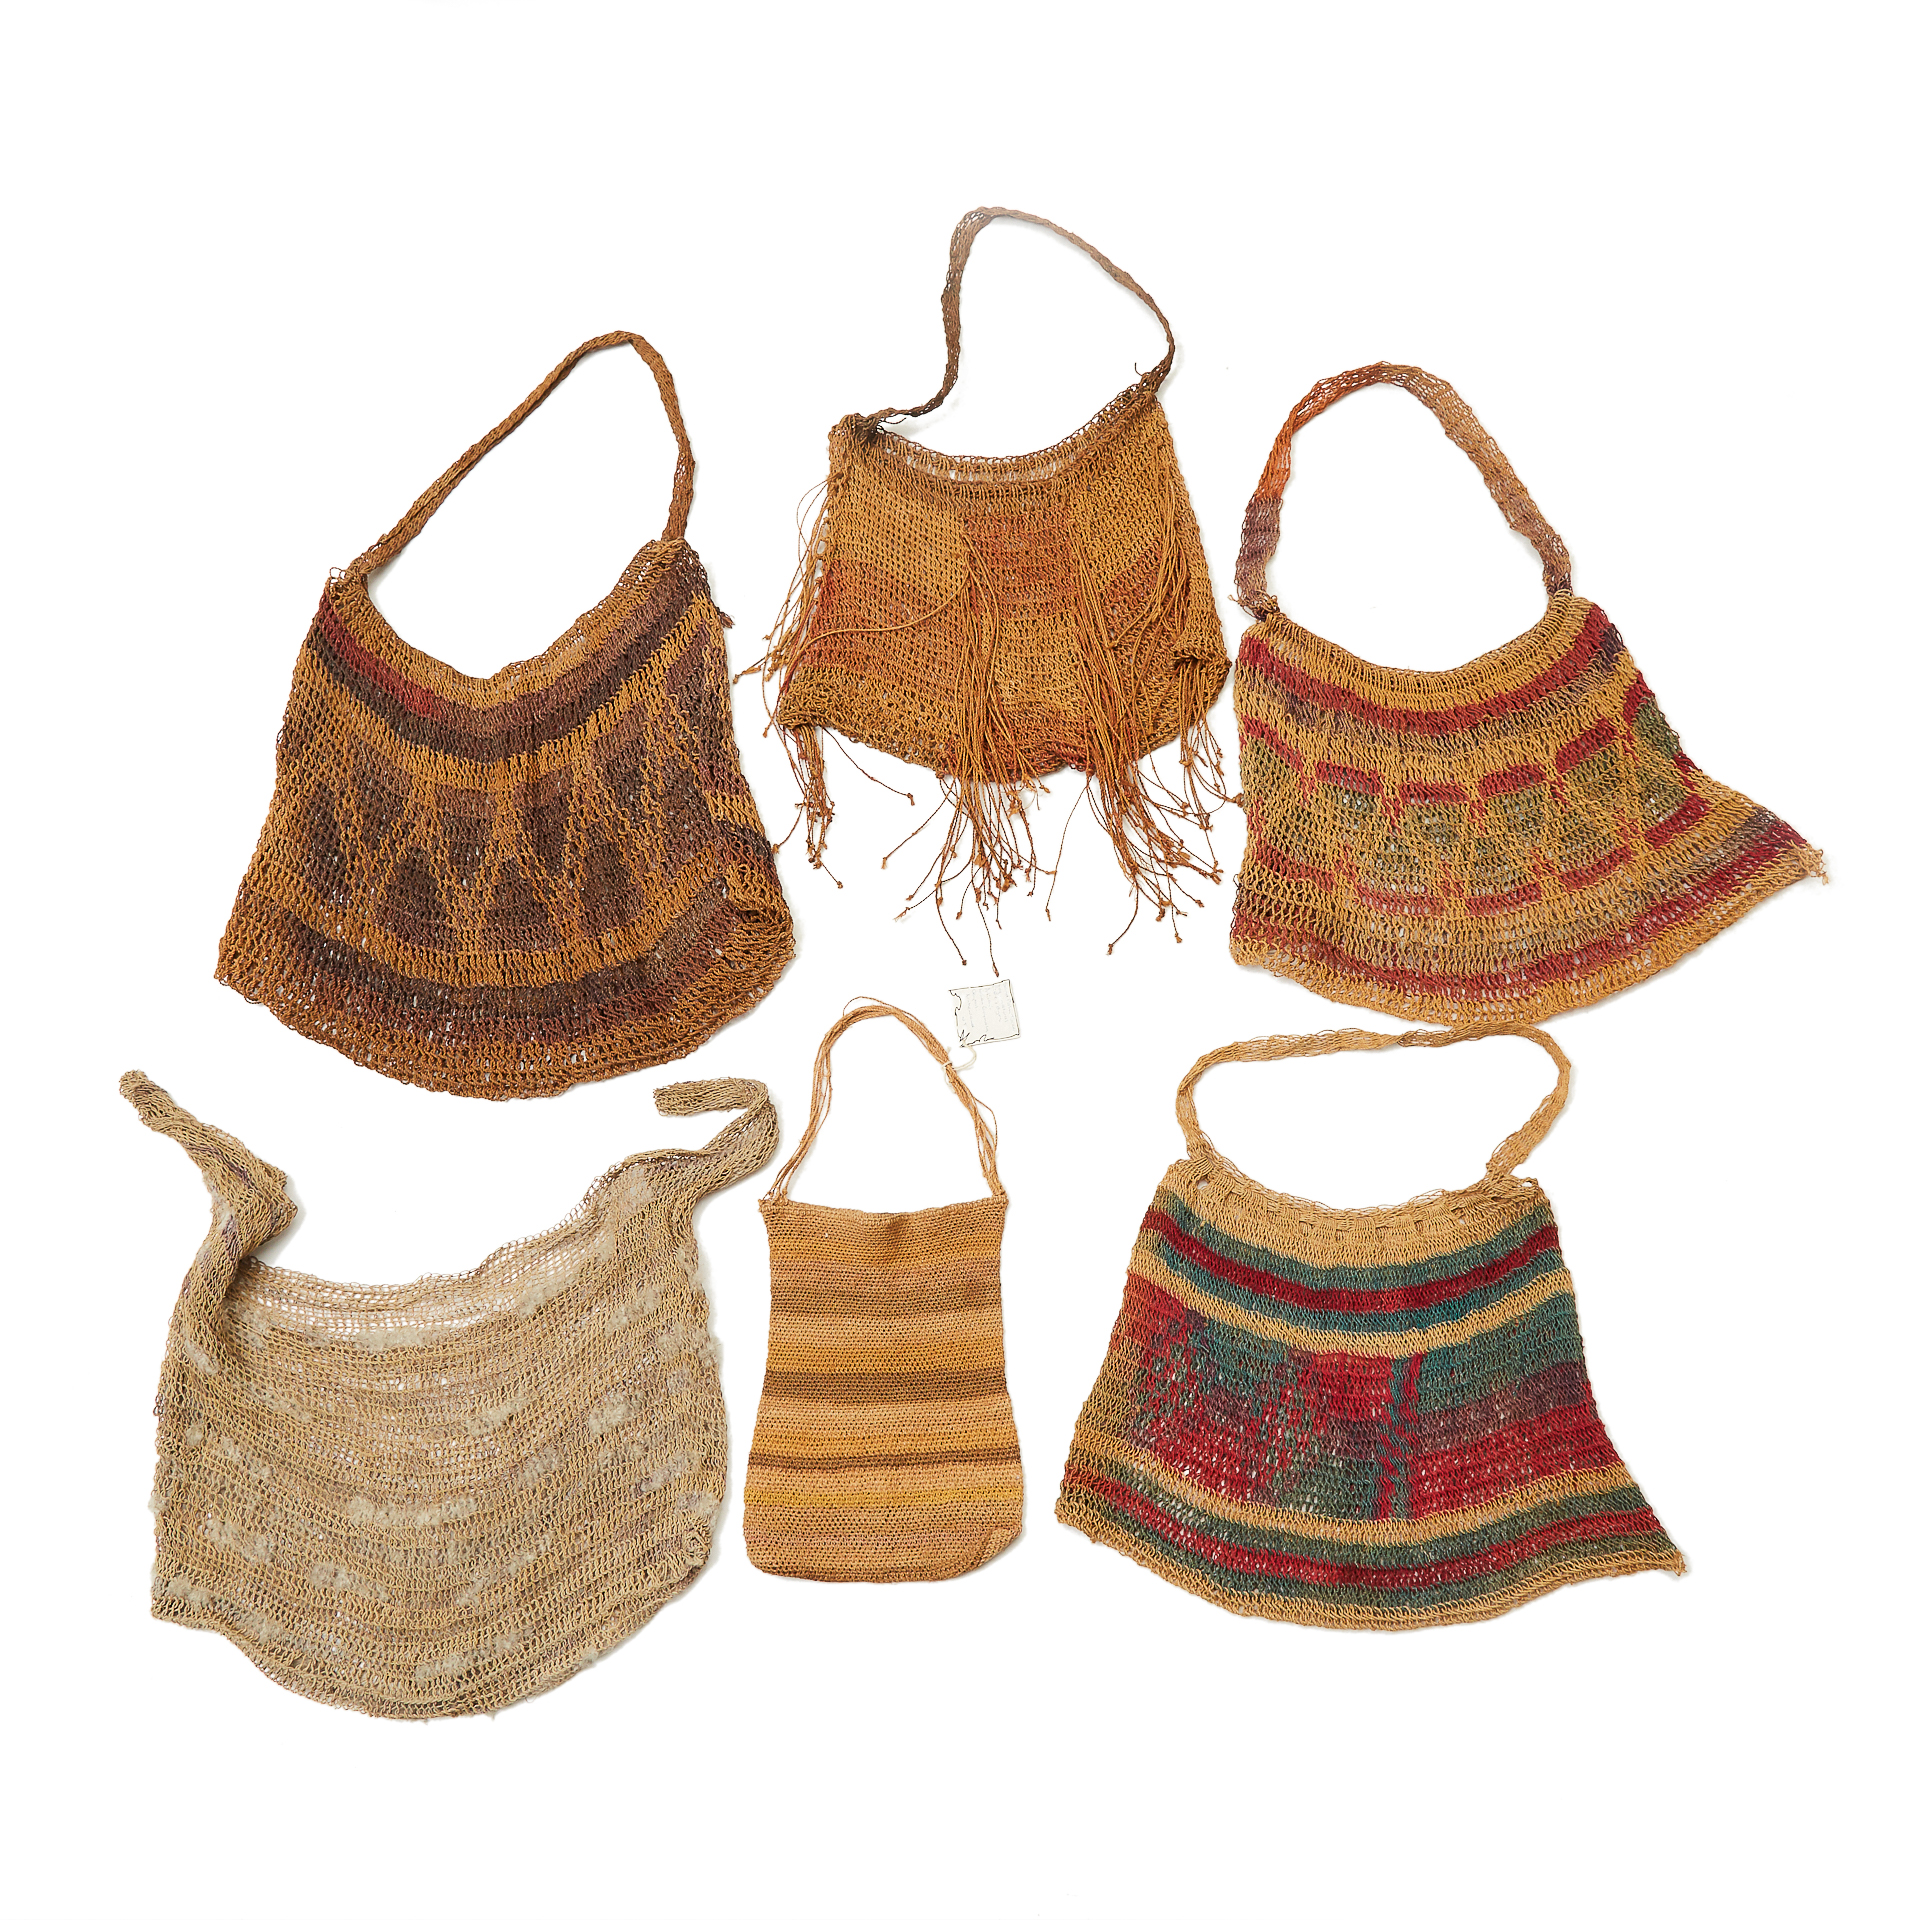 Five Papua New Guinea Woven Bilum Bags together with a woven Sand Palm Bag, Australia 